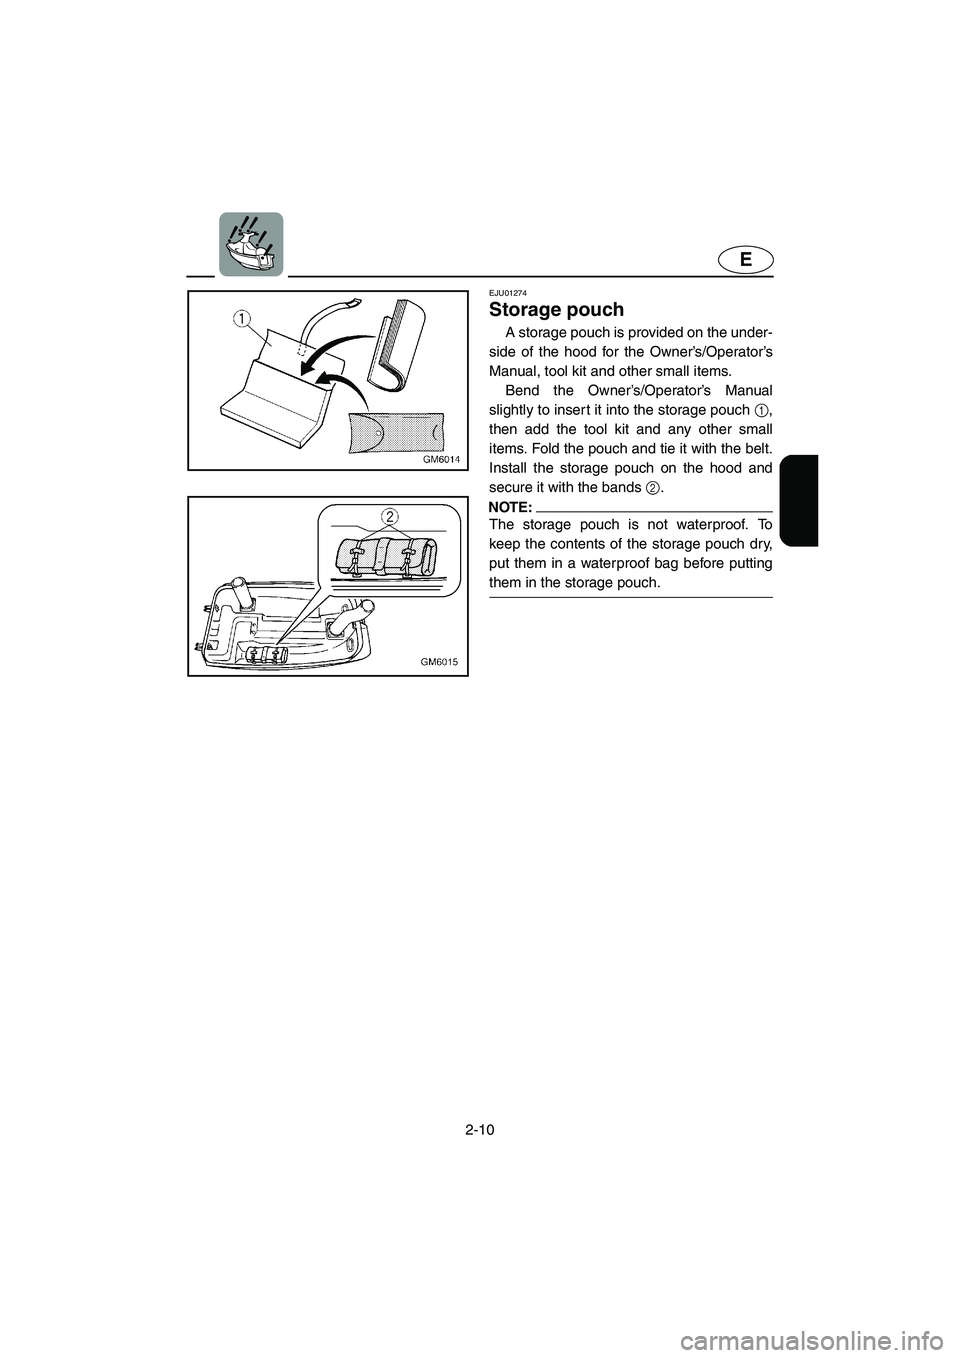 YAMAHA SUPERJET 2002  Owners Manual 2-10
E
EJU01274 
Storage pouch  
A storage pouch is provided on the under-
side of the hood for the Owner’s/Operator’s
Manual, tool kit and other small items. 
Bend the Owner’s/Operator’s Manu